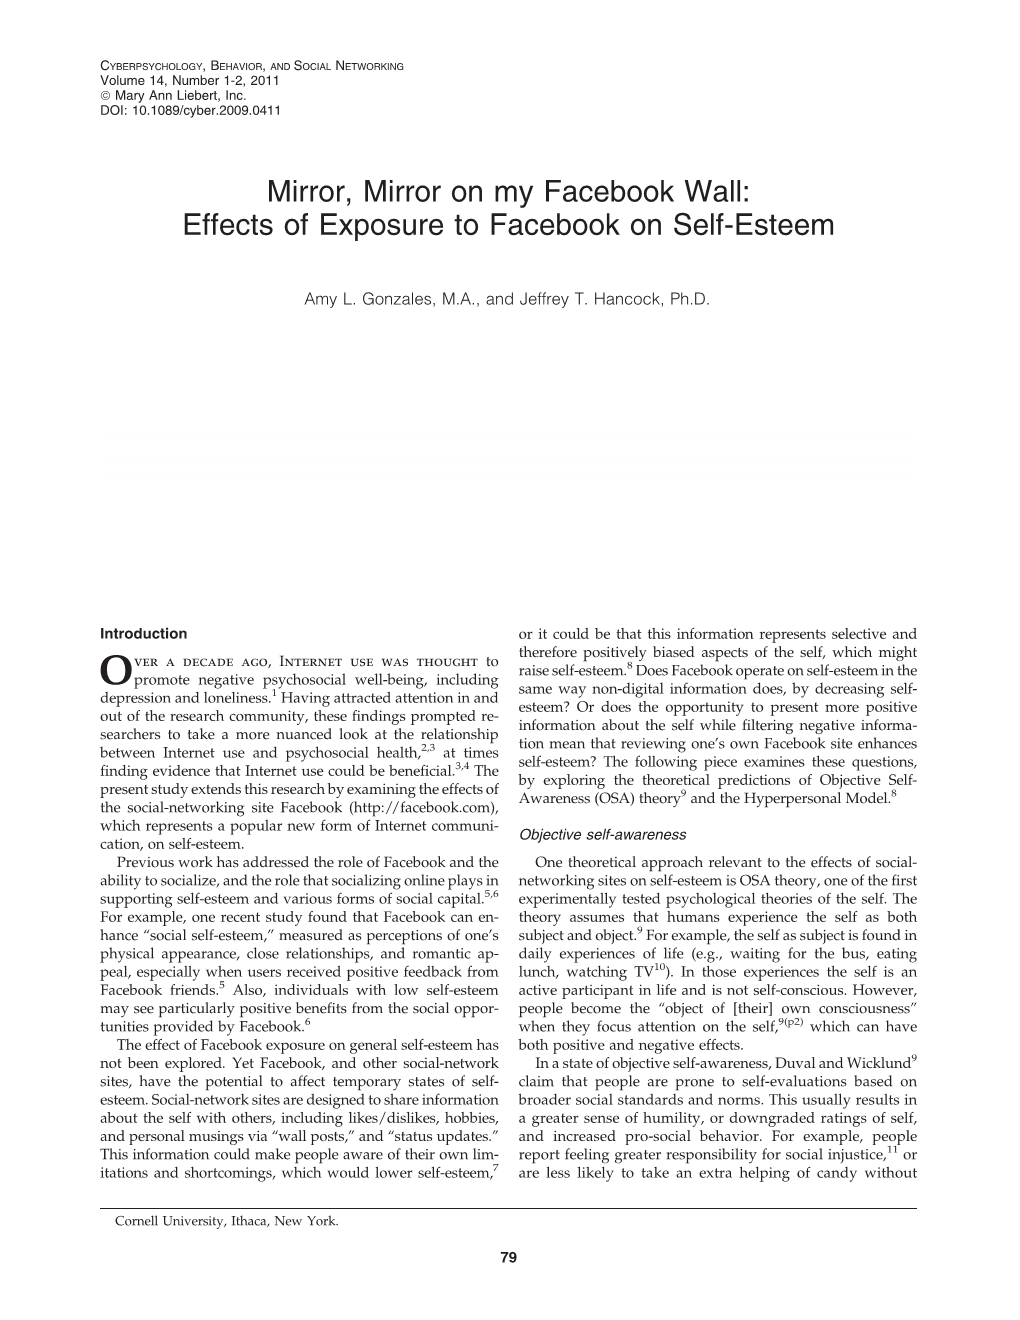 Mirror, Mirror on My Facebook Wall: Effects of Exposure to Facebook on Self-Esteem